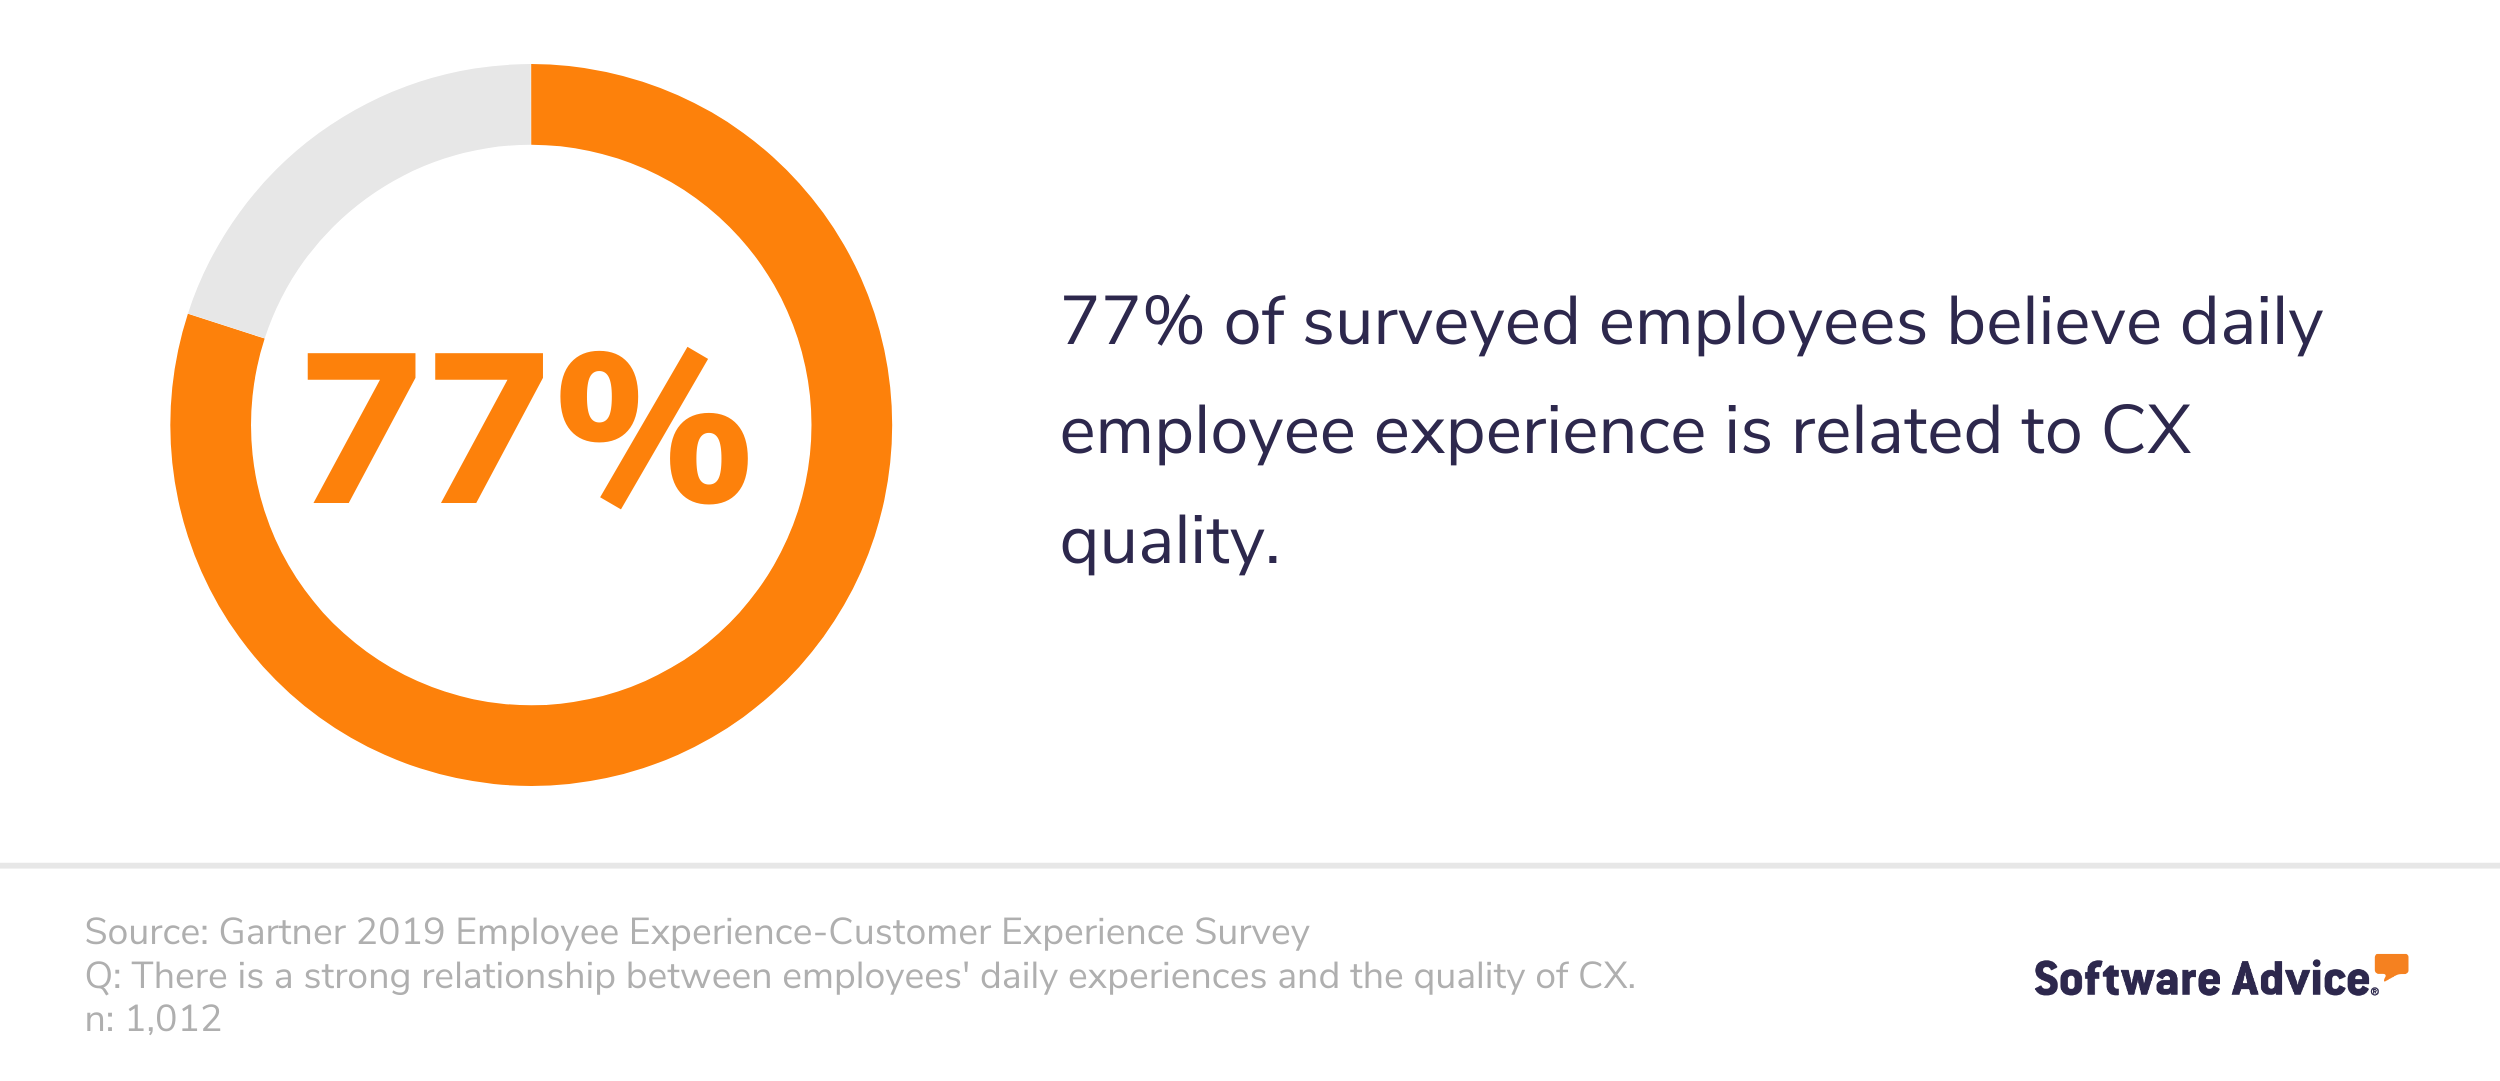 Employees'-Opinion-about-Daily-Experiences-and-the-Quality-of-CX